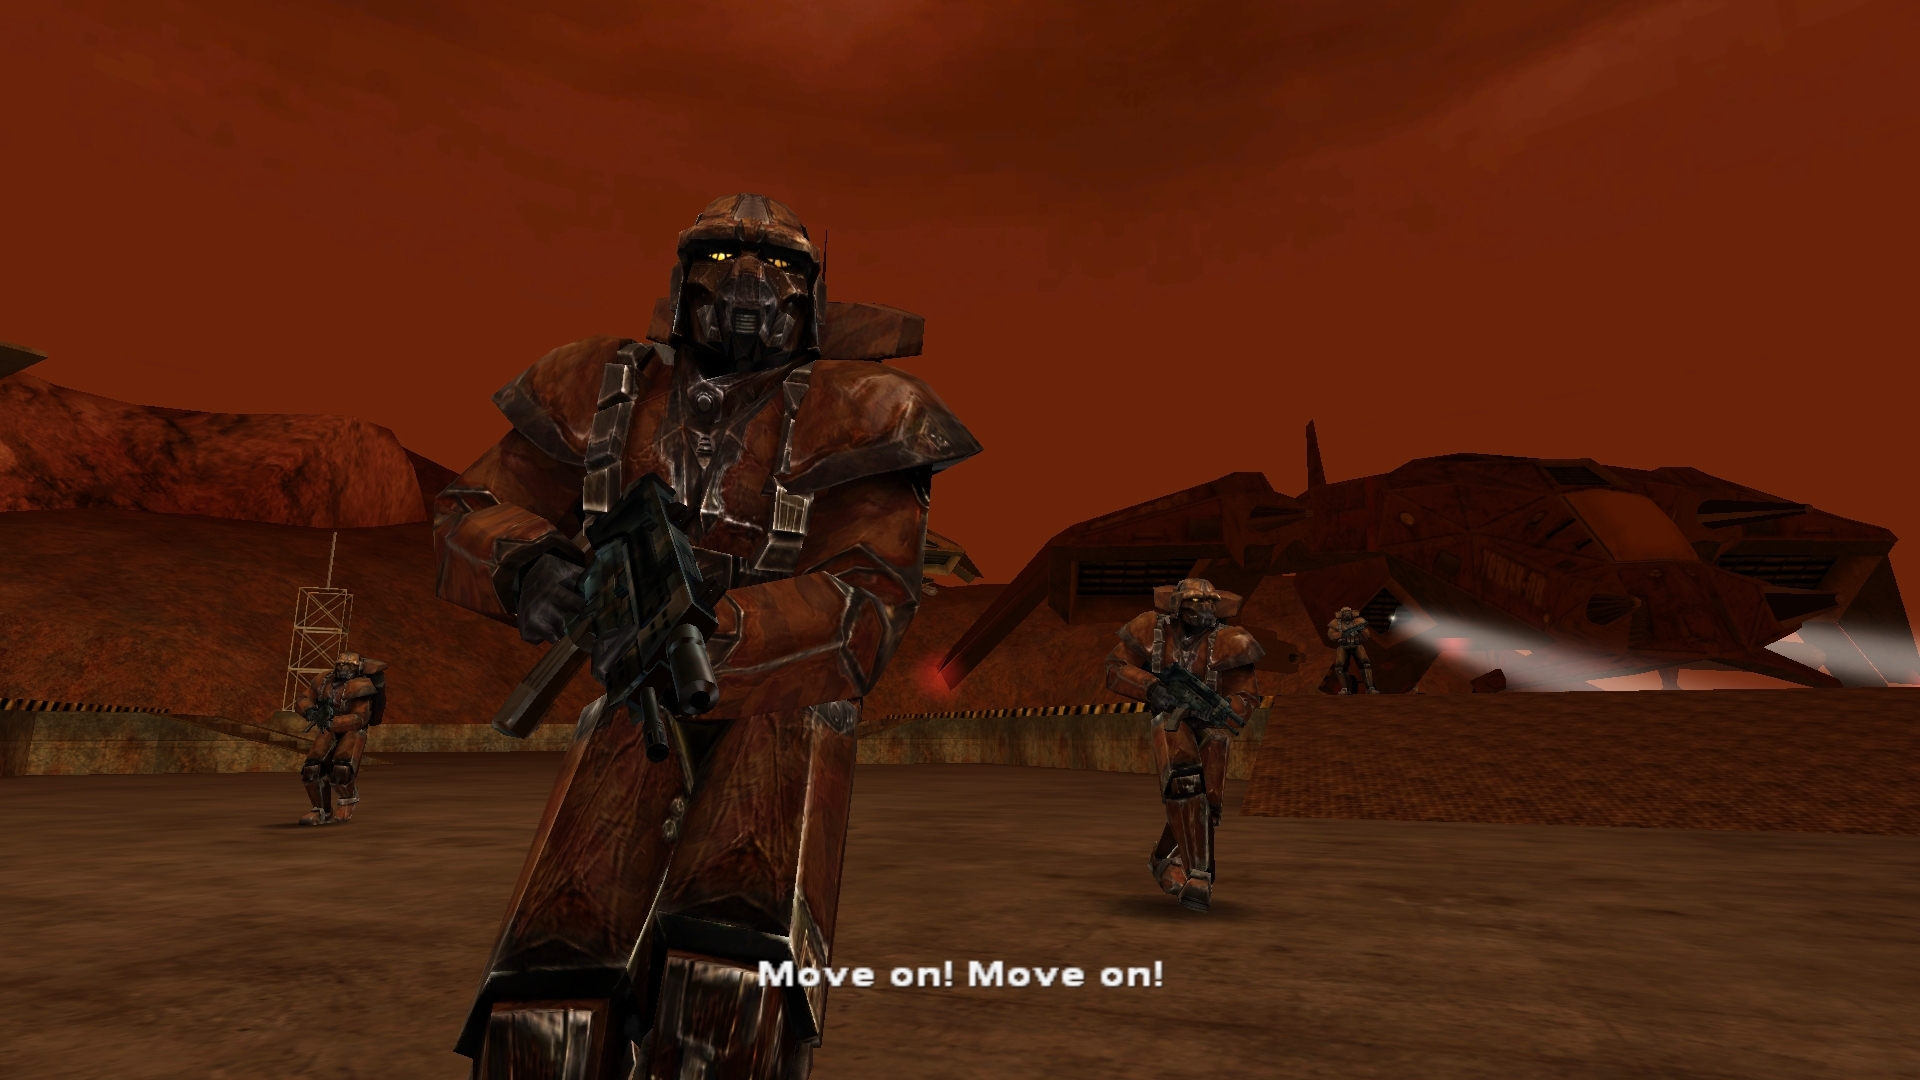 chaser_a_shooter_game_about_mars_screenshot_36.jpg